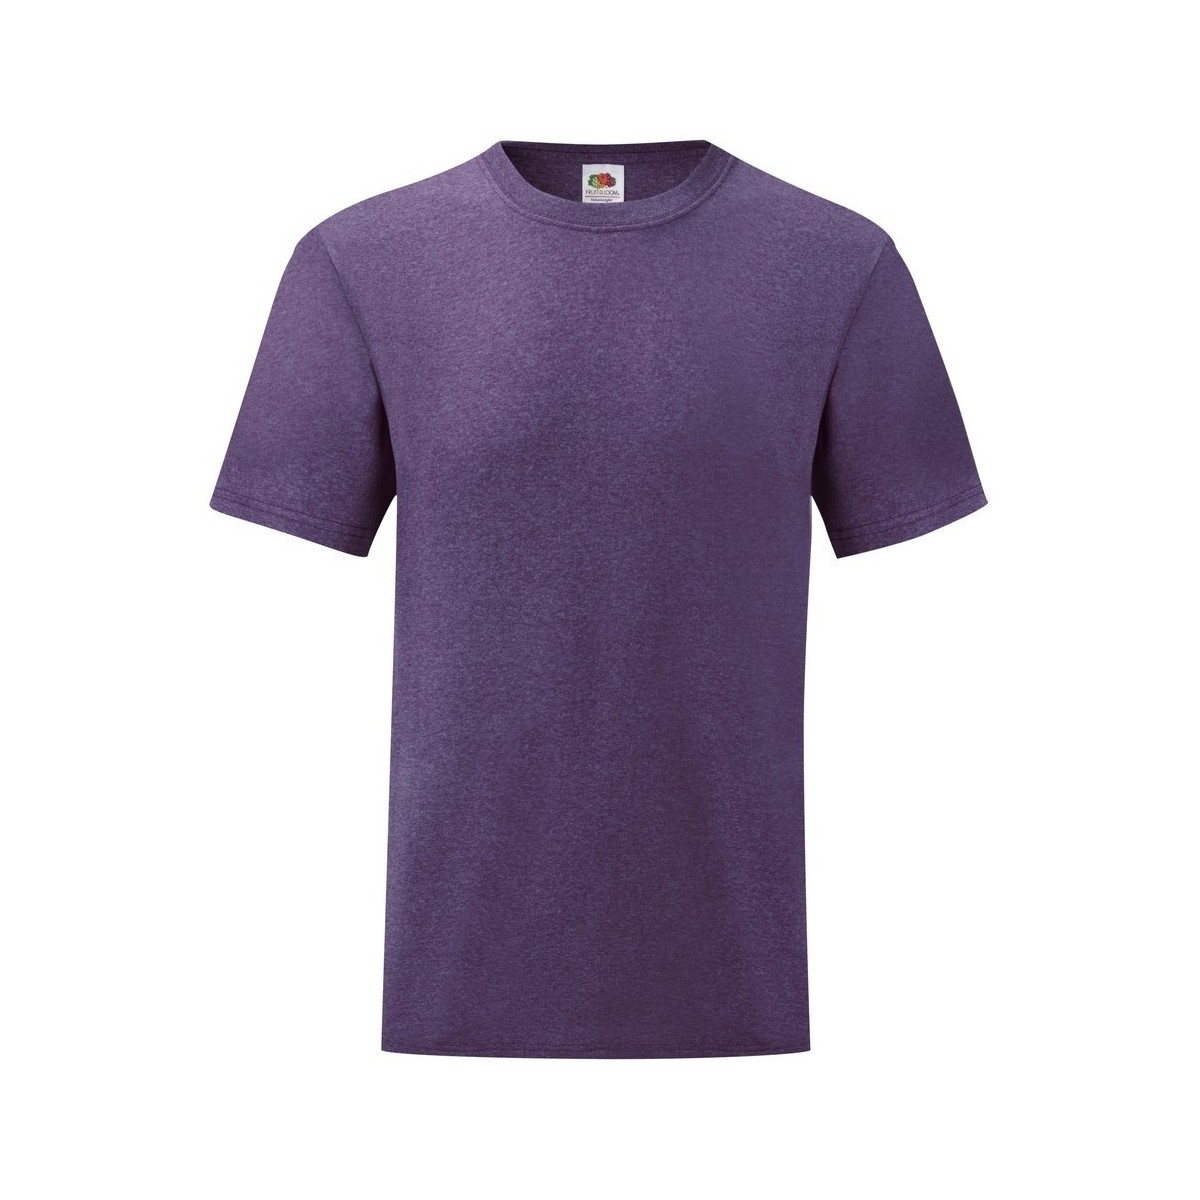 Vêtements Homme T-shirts Collection manches courtes wallets caps accessories lighters polo-shirts Collection 36 Knitwear 61036 Violet